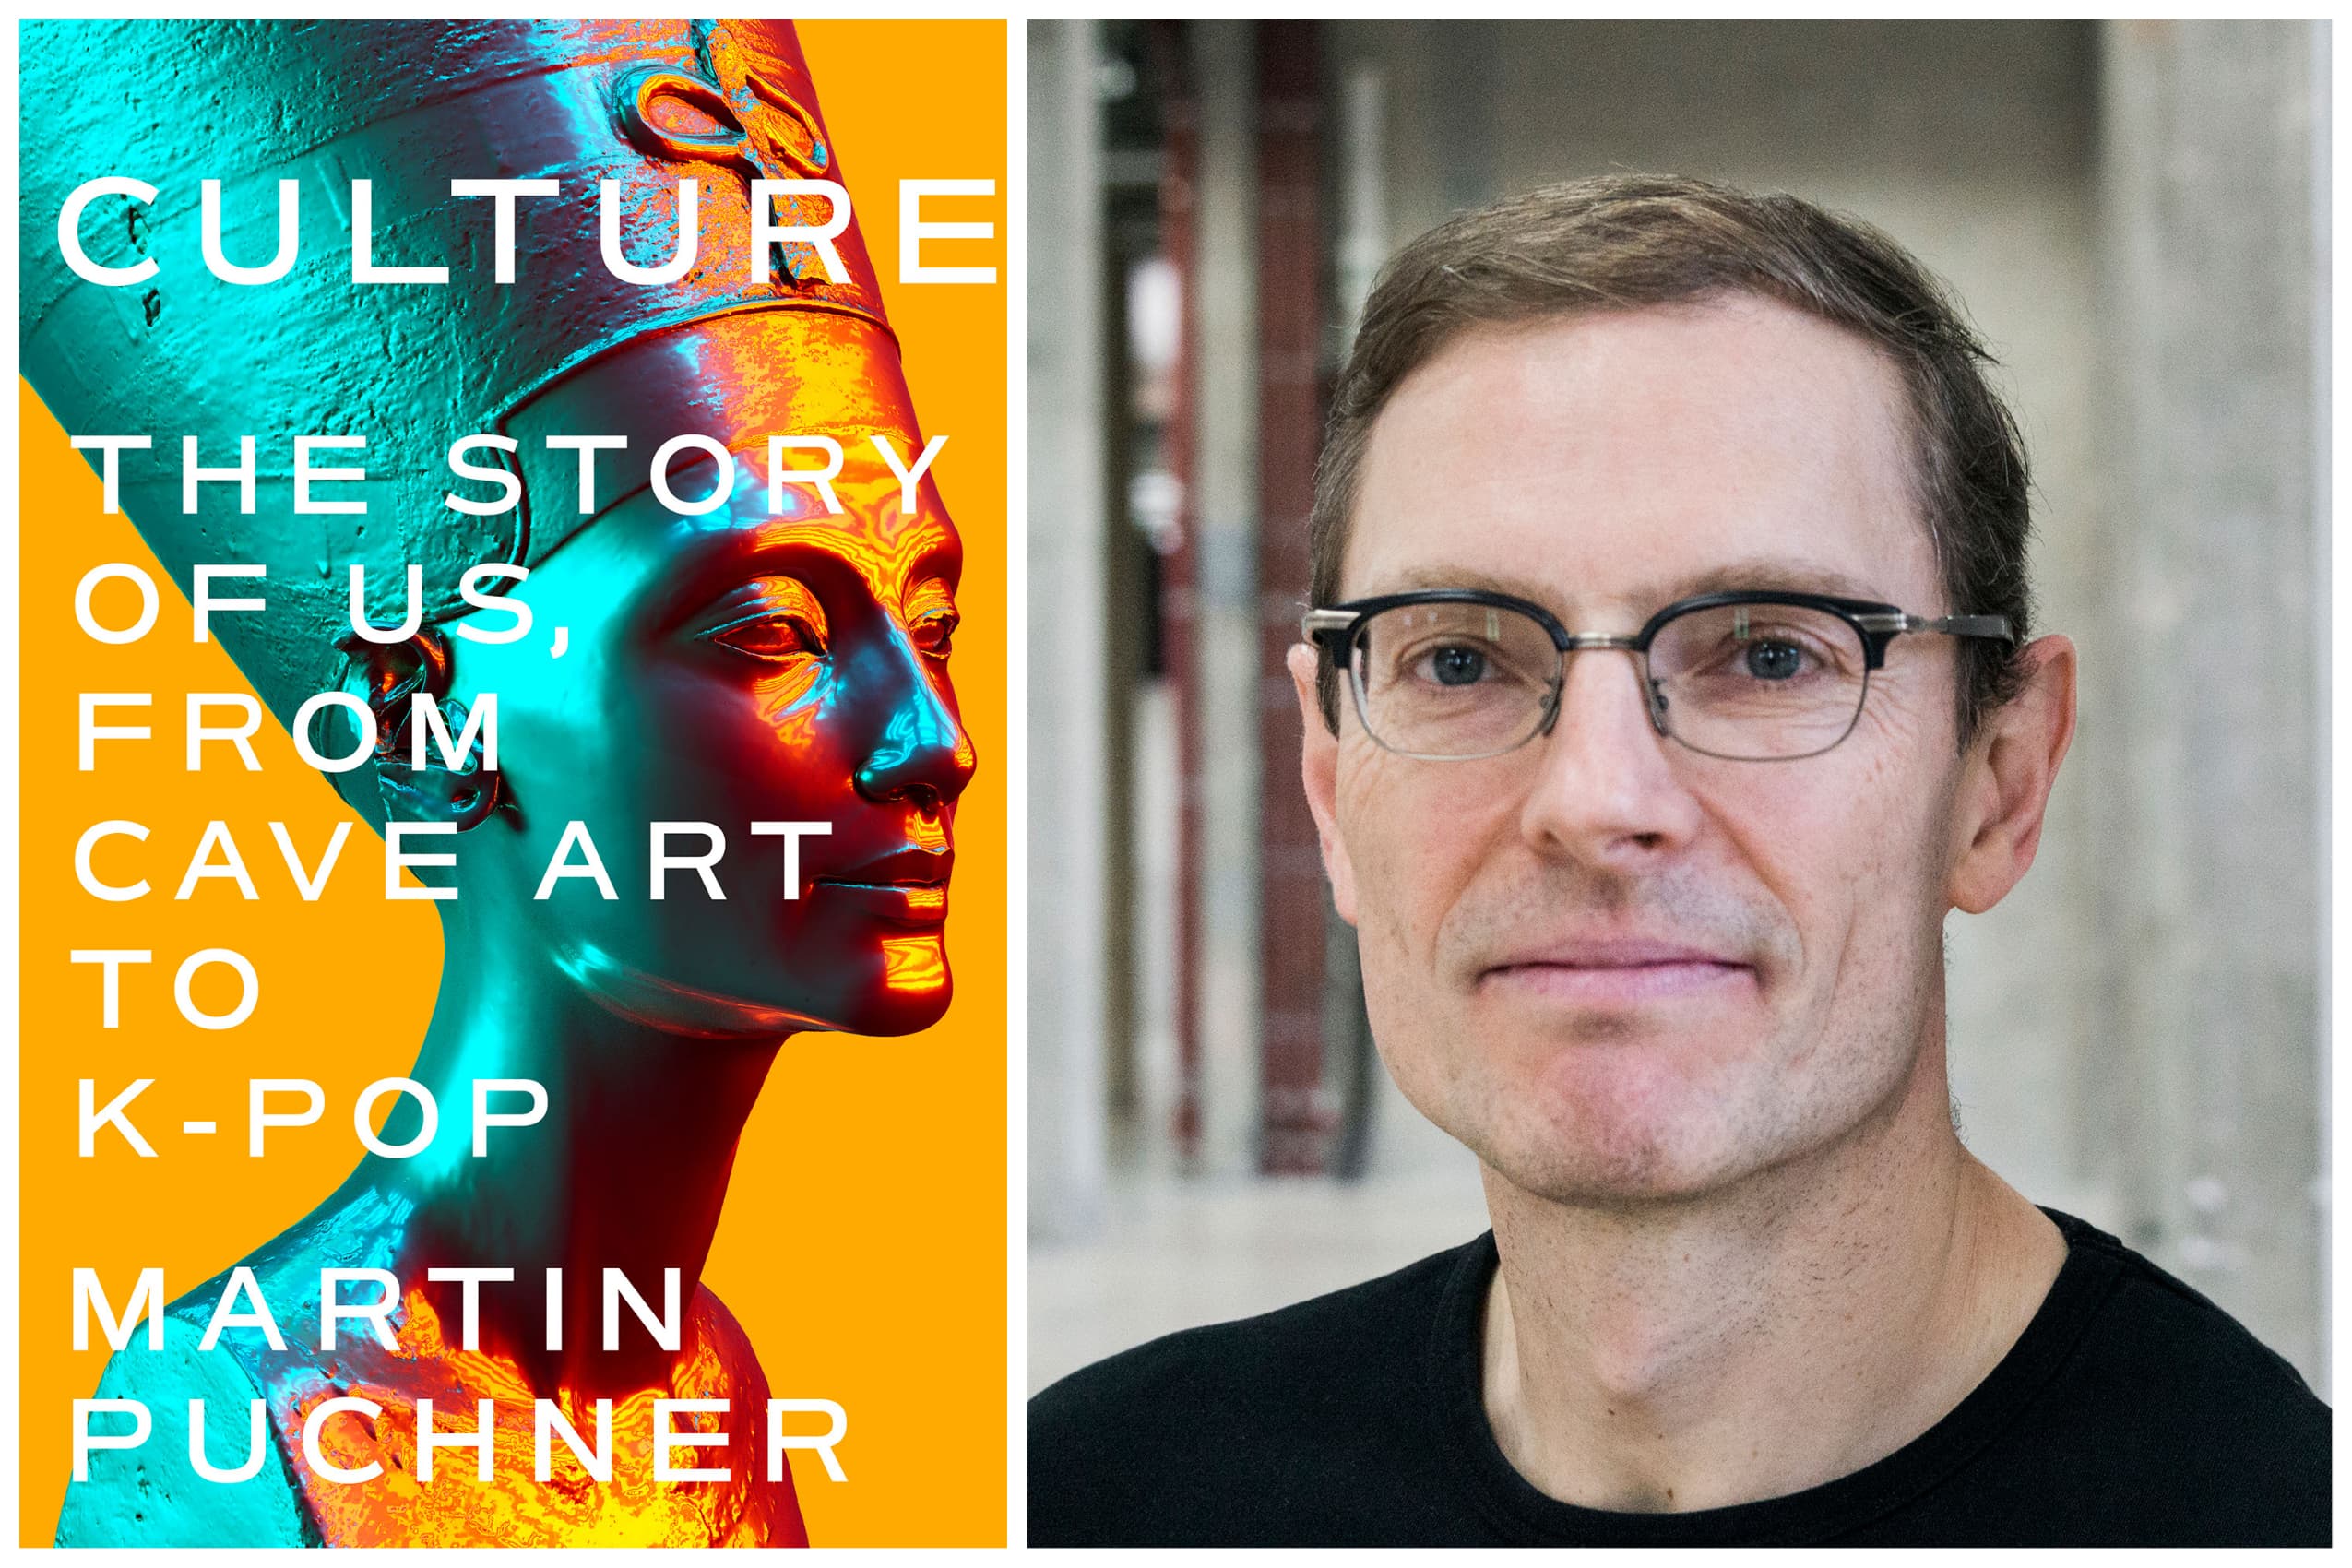 Martin Puchner's &quot;Culture: The Story of Us from Cave Art to K-Pop is available Feb. 7. (Courtesy W.W. Norton and Johannes Marburg)